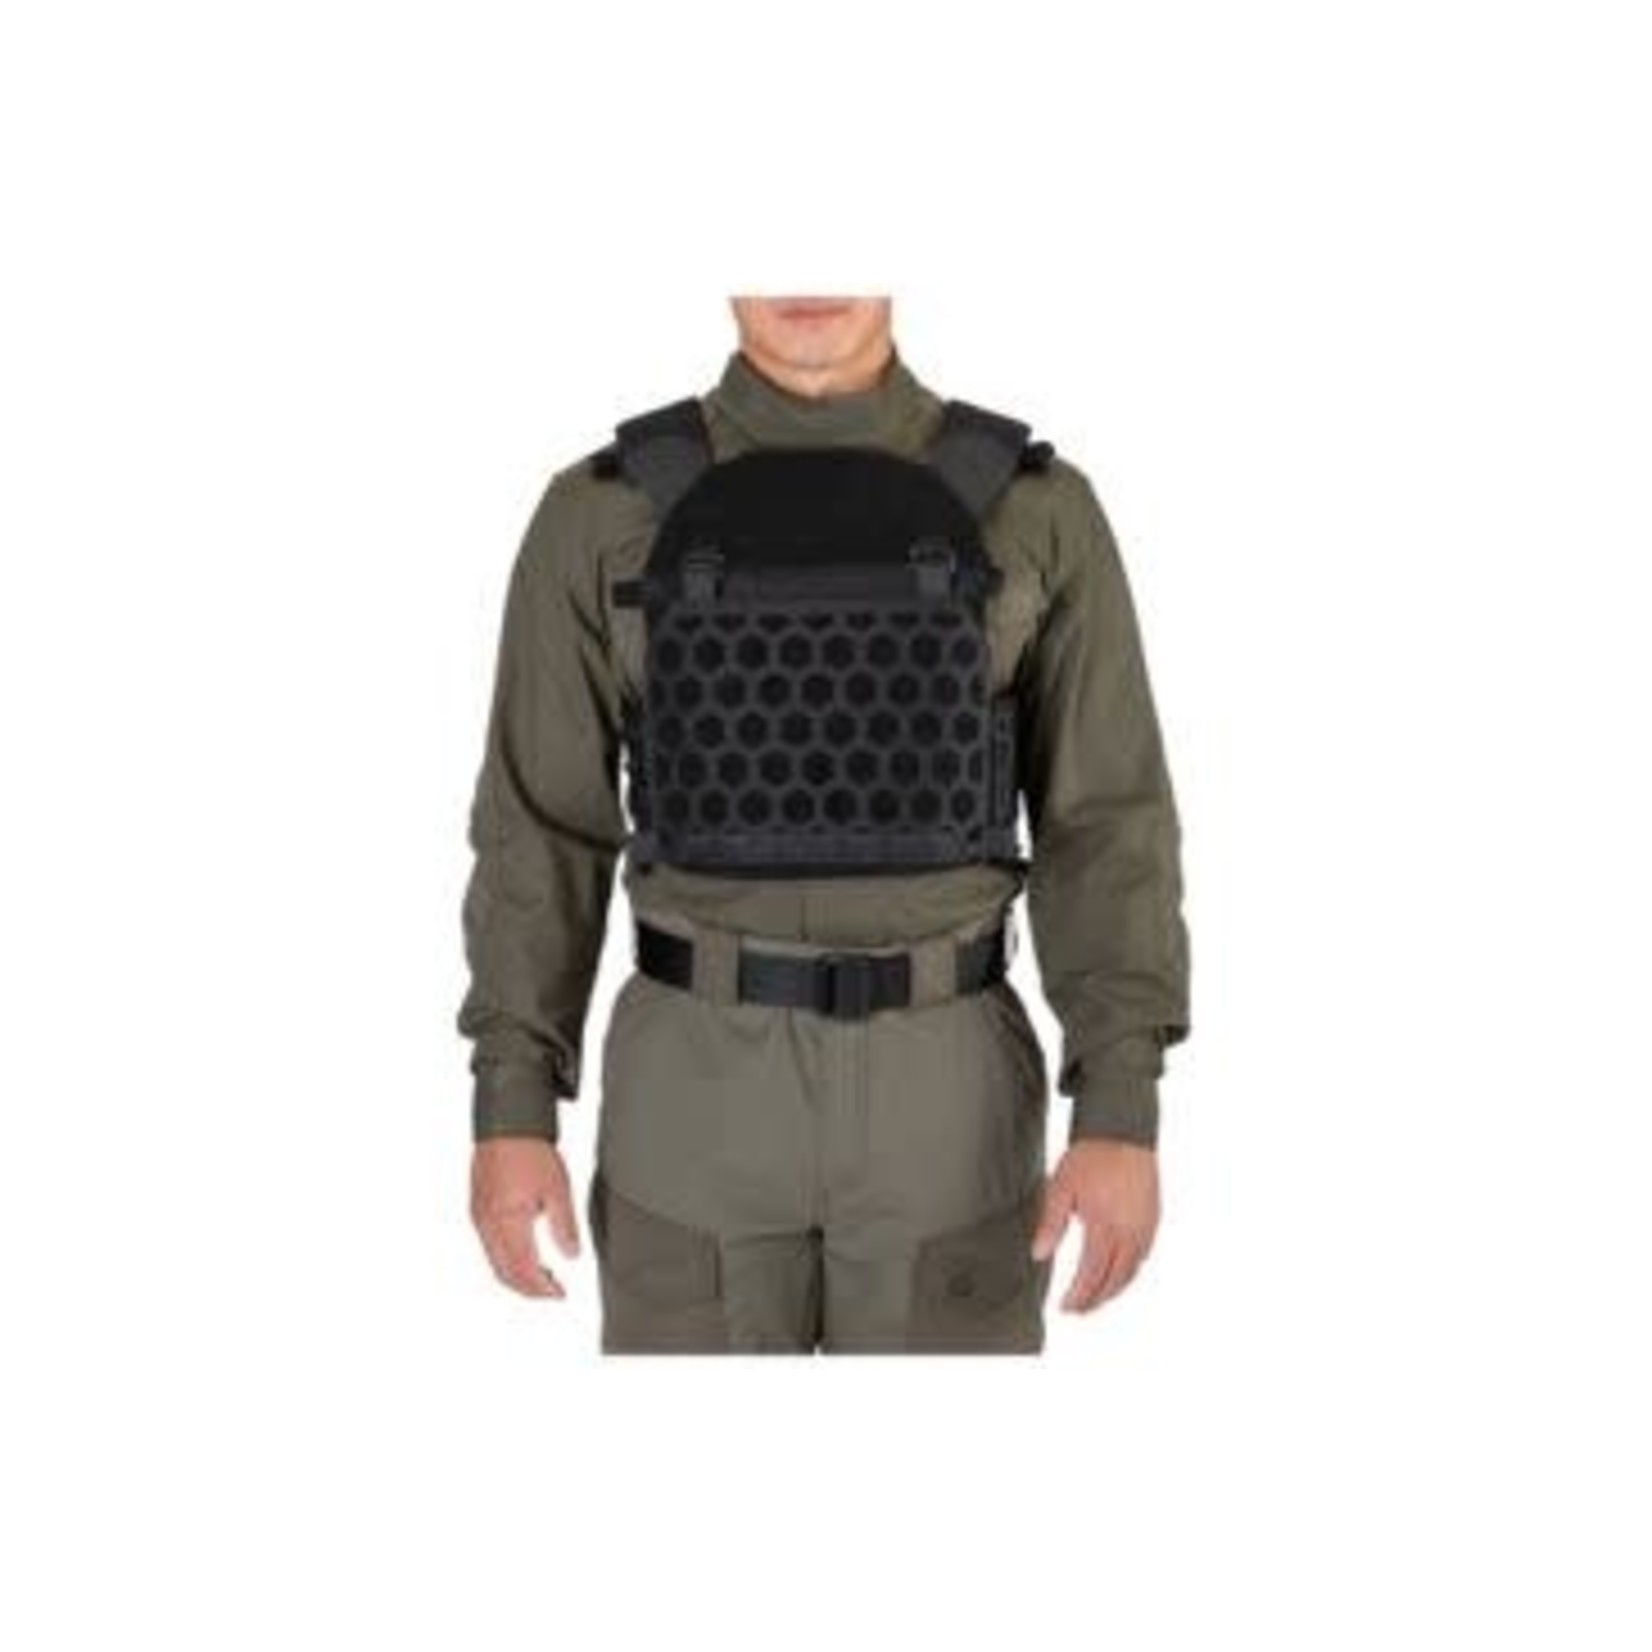 5.11 Tactical 5.11 All Missions Plate Carrier-Size: L/XL